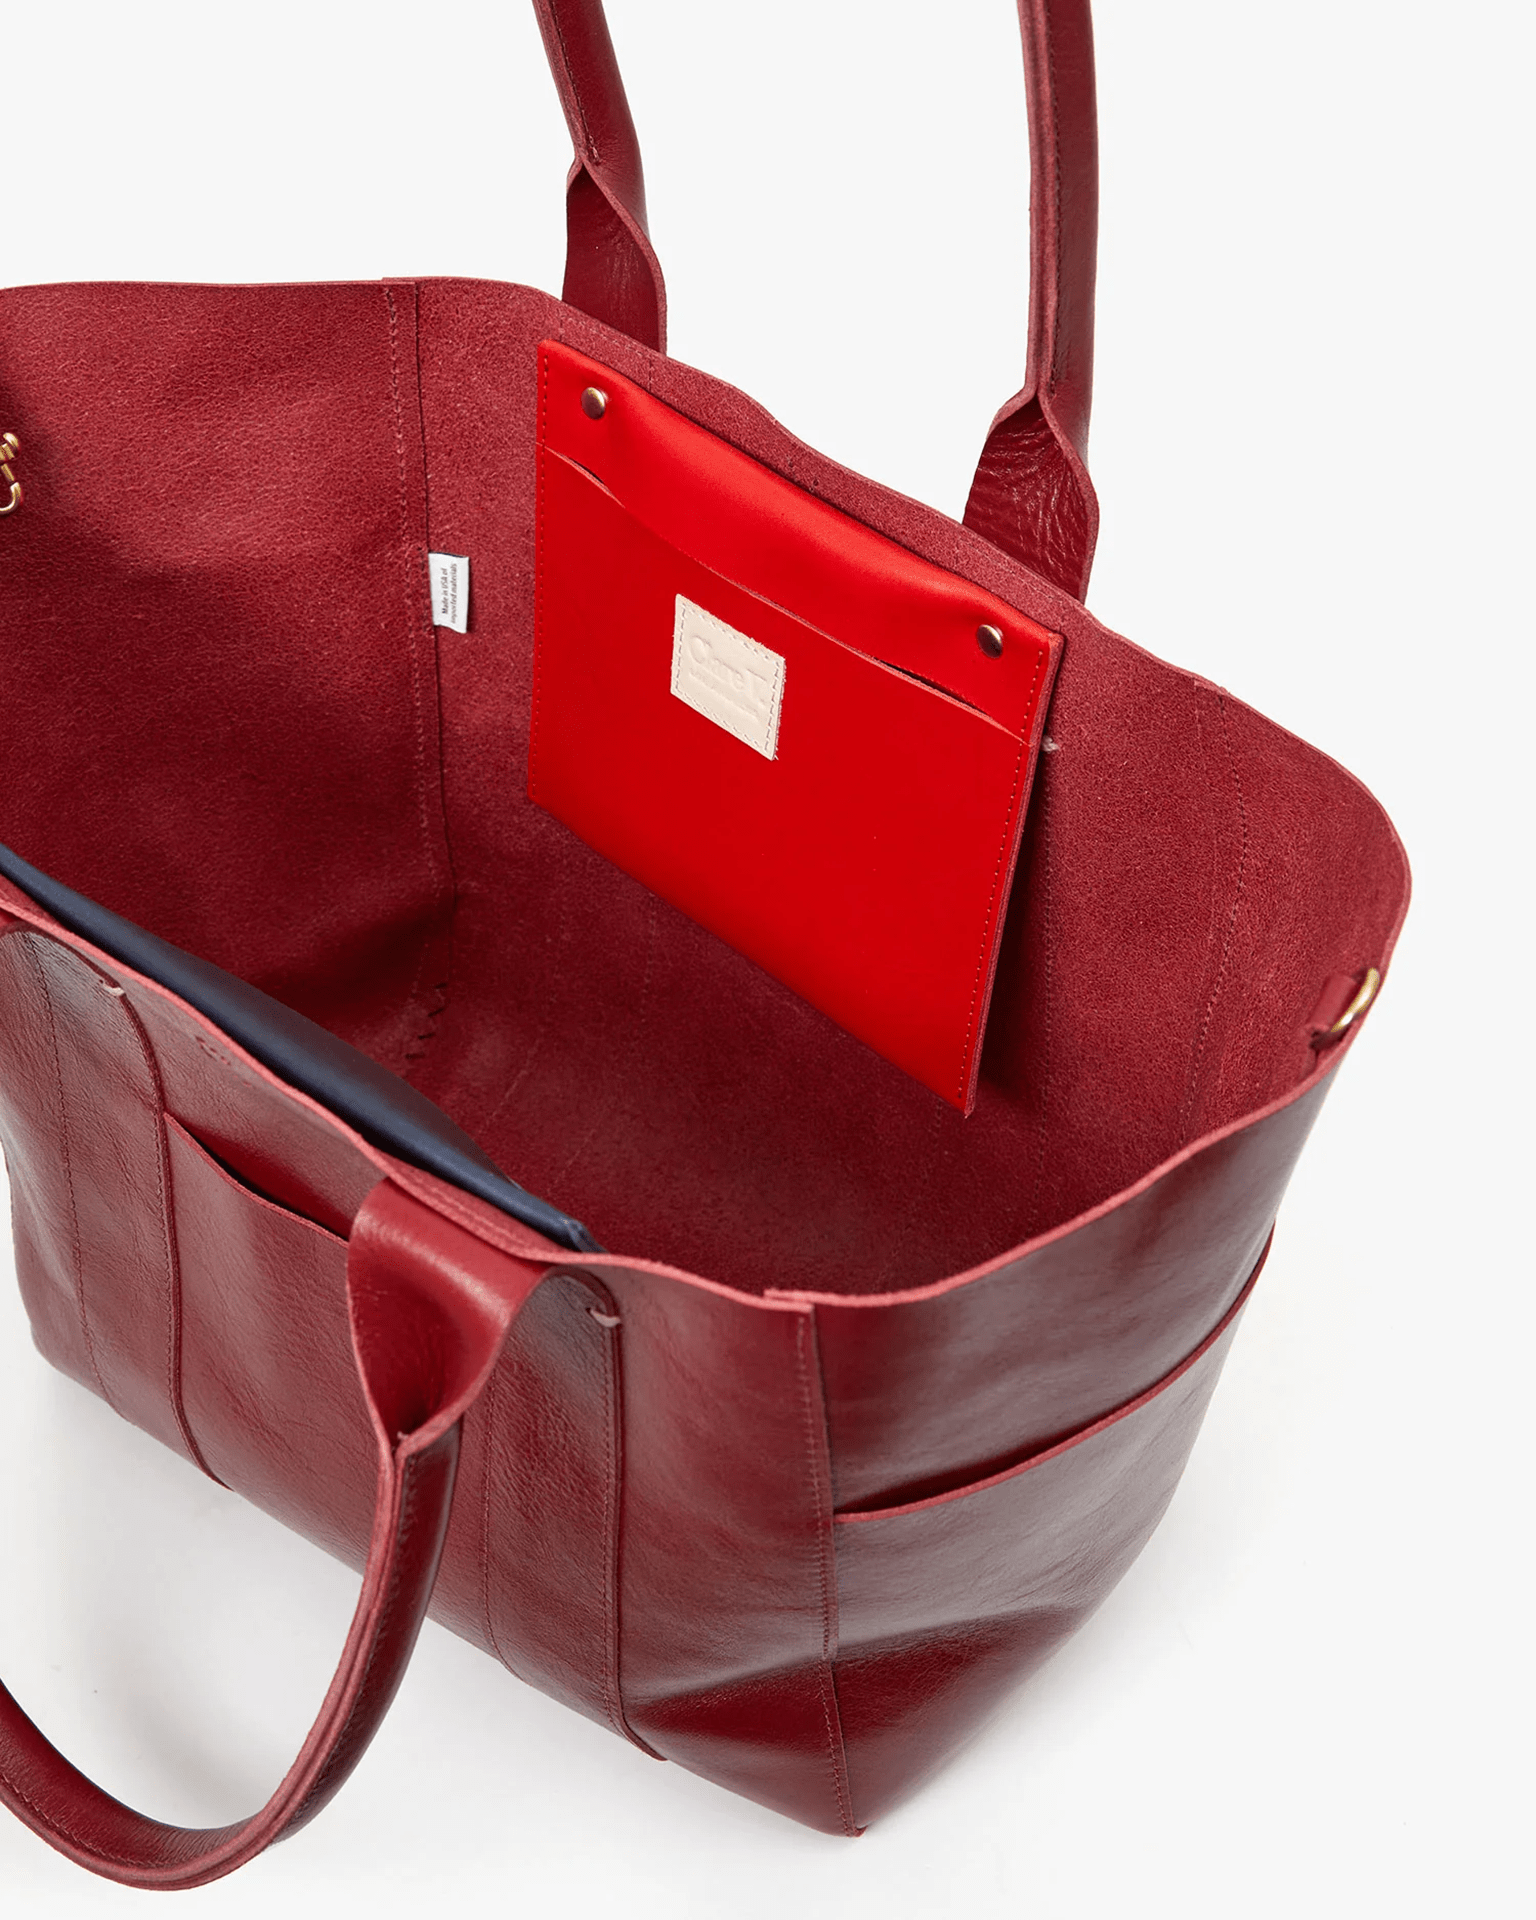 clare v leather tote